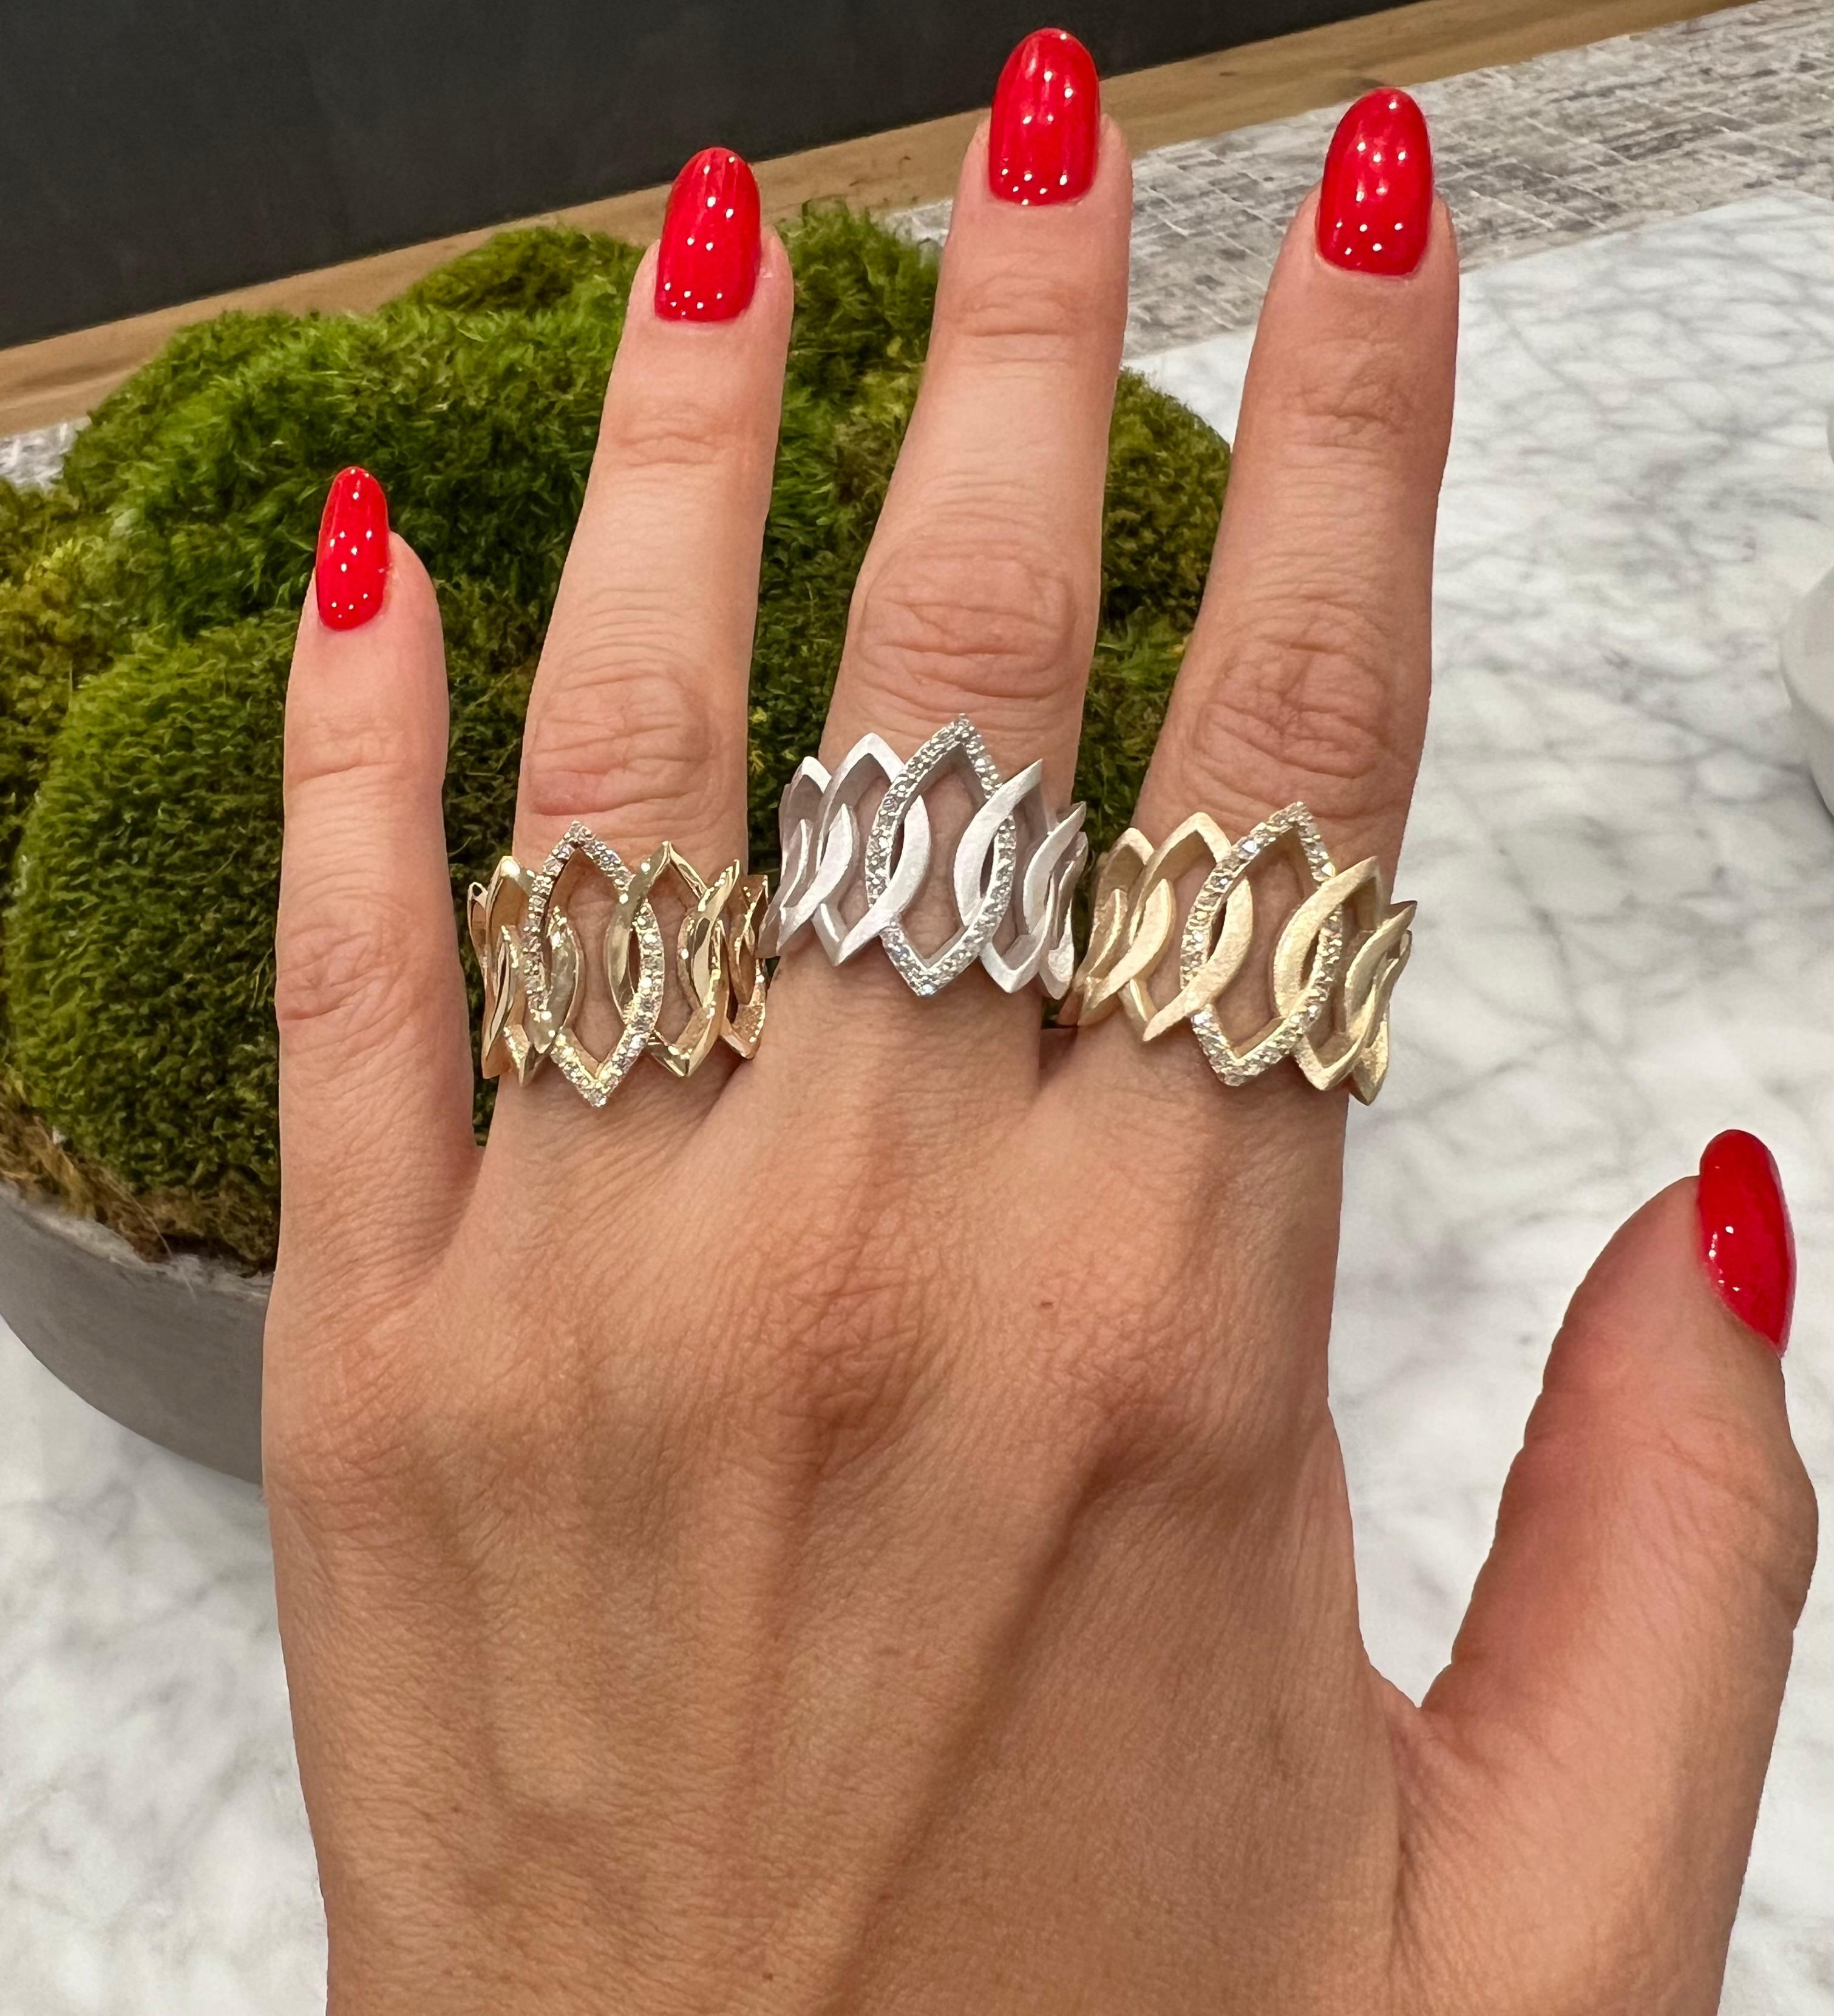 Crafted in 14K gold, this sparkling, eye-catching cuff ring is perfect for any occasion. This luxe cuff ring features a geometric design and glistening round diamonds that catch the light in different angles. Make a bold statement with this